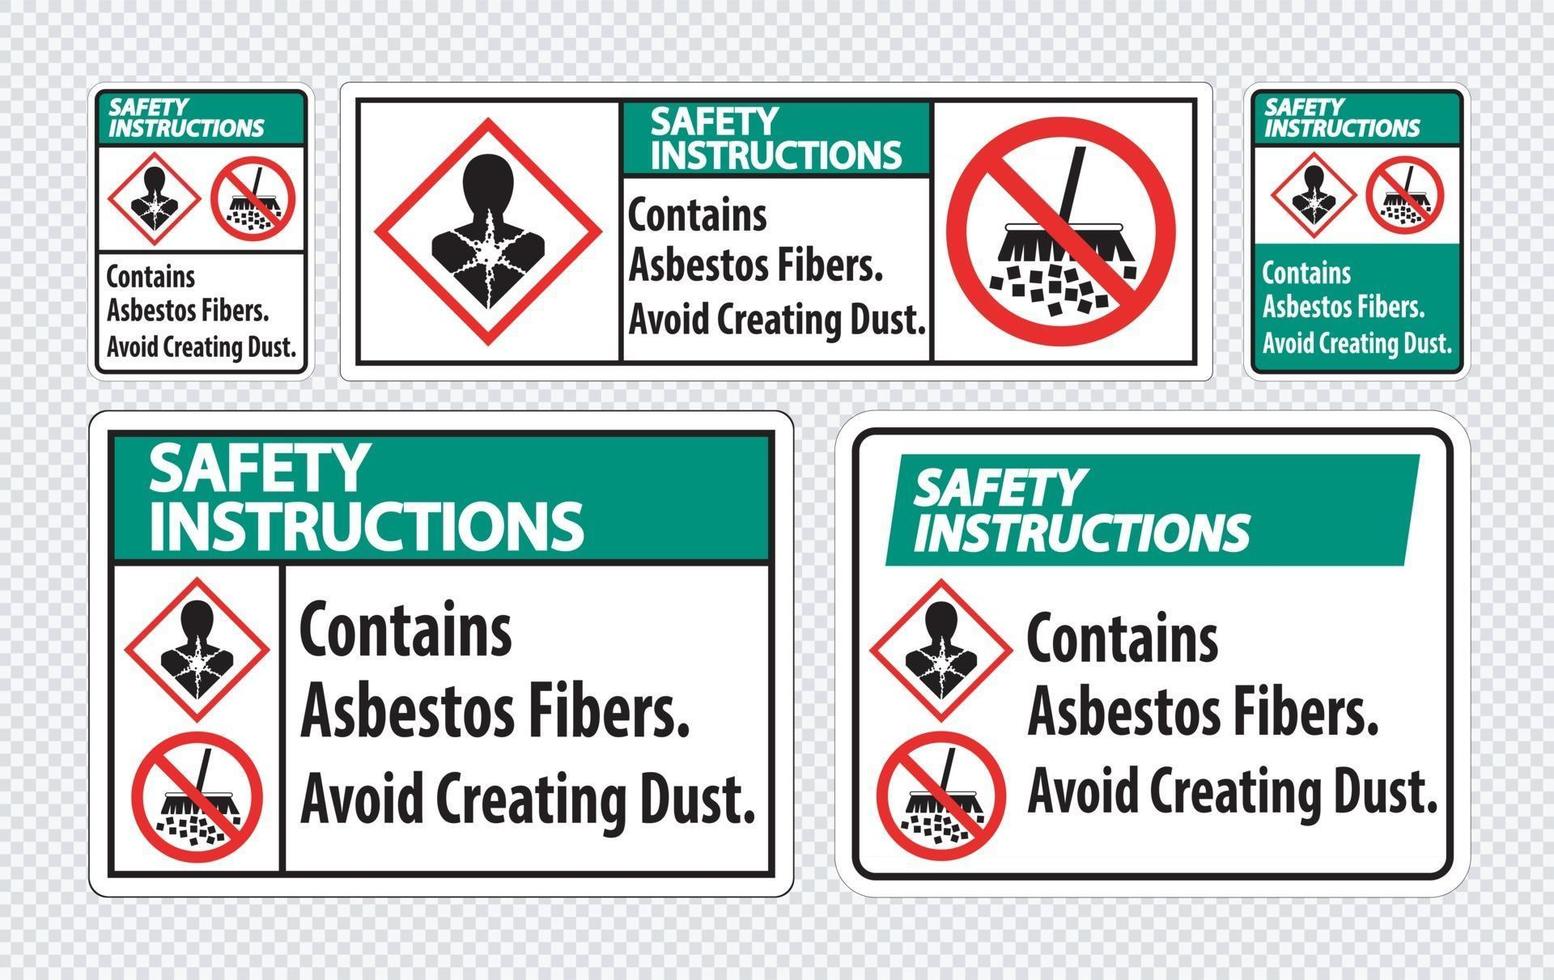 Safety Instructions Label Contains Asbestos Fibers,Avoid Creating Dust vector